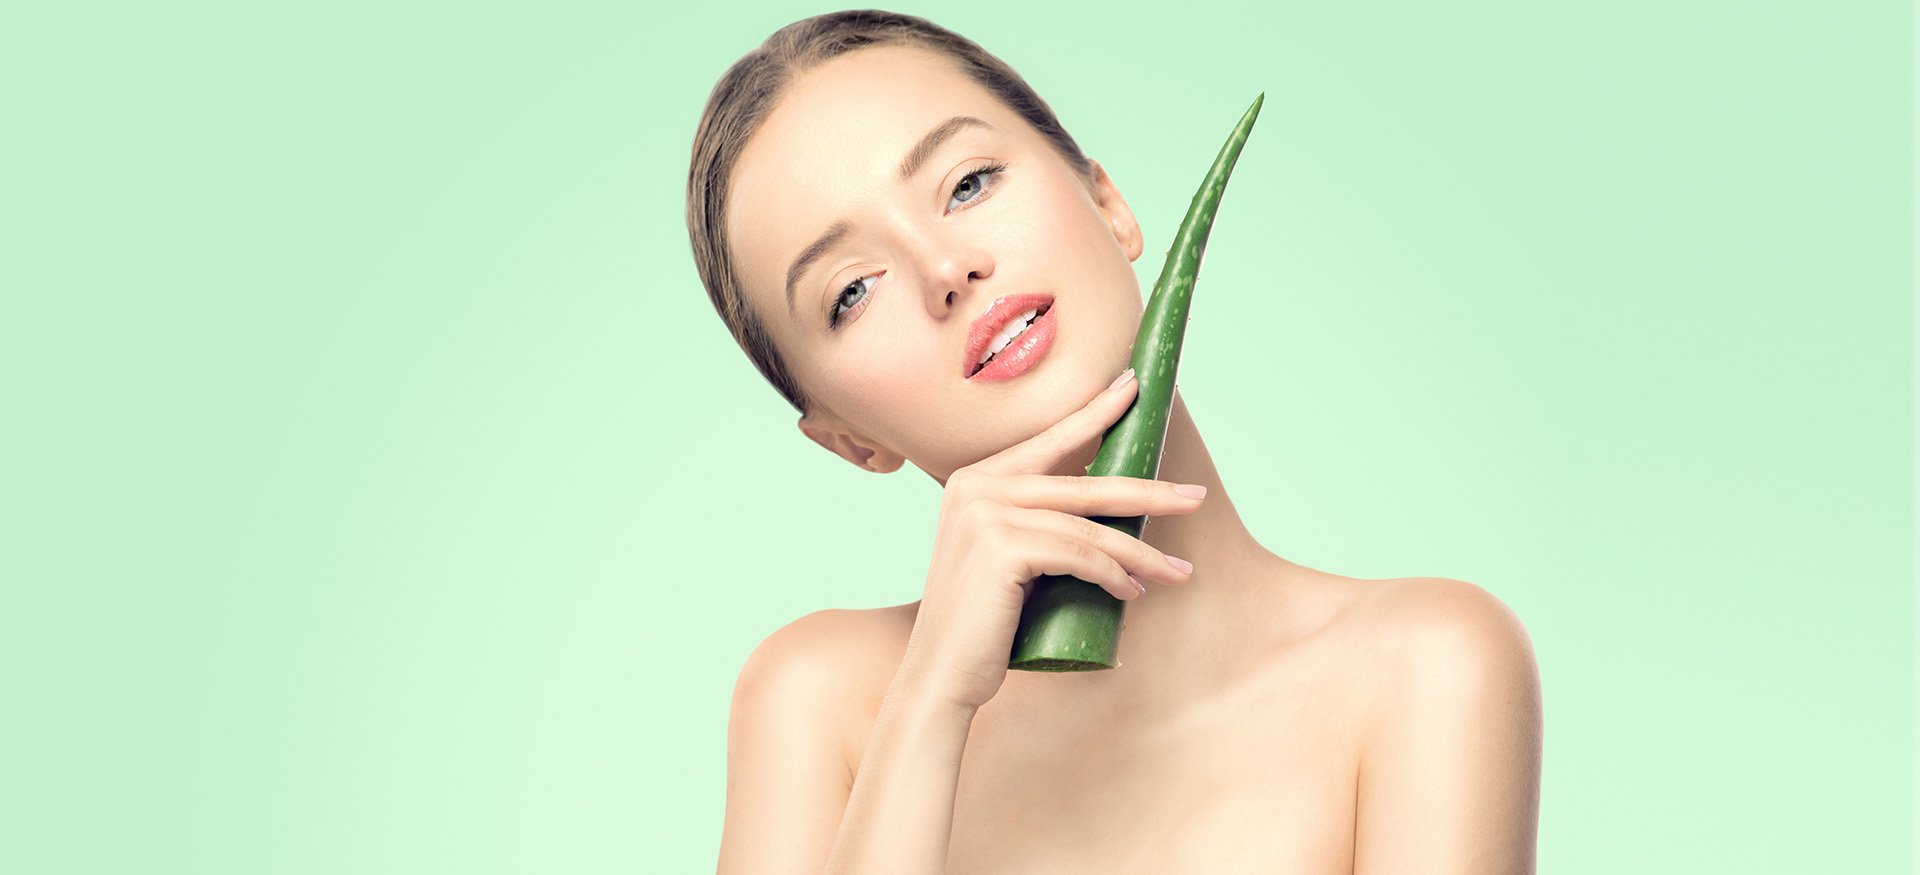 The Timeless Natural Beauty Product Award Goes To Aloe Vera Gel